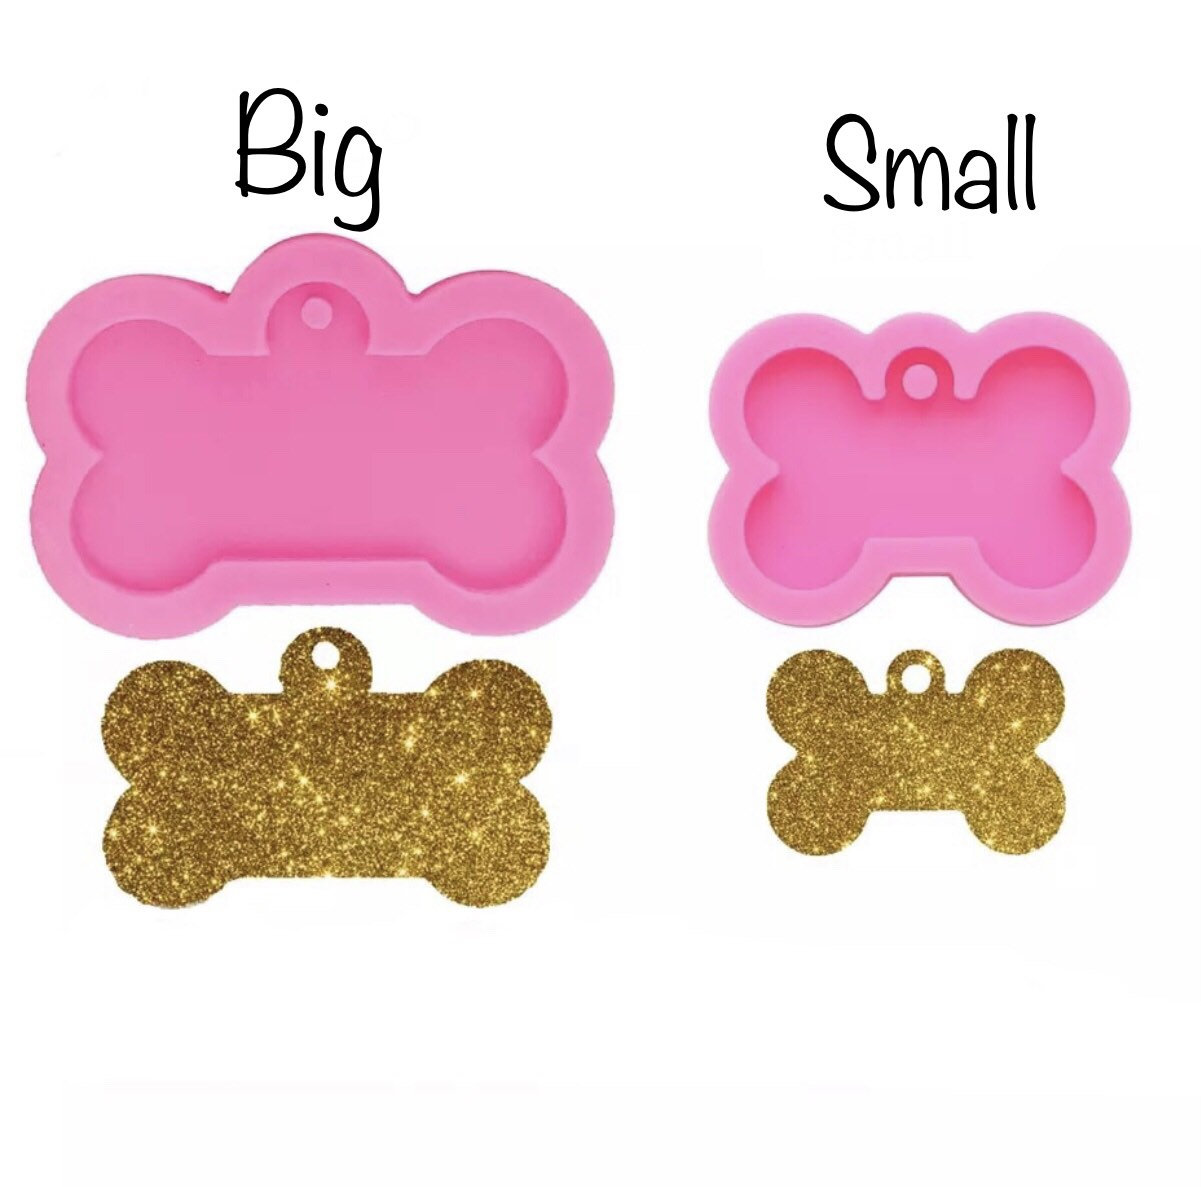 Dog Bone Resin Silicone Molds, 10Pcs DIY Cute Dog Tag Epoxy Resin Mold with  20 Pcs Keychains for DIY Crafts Making 